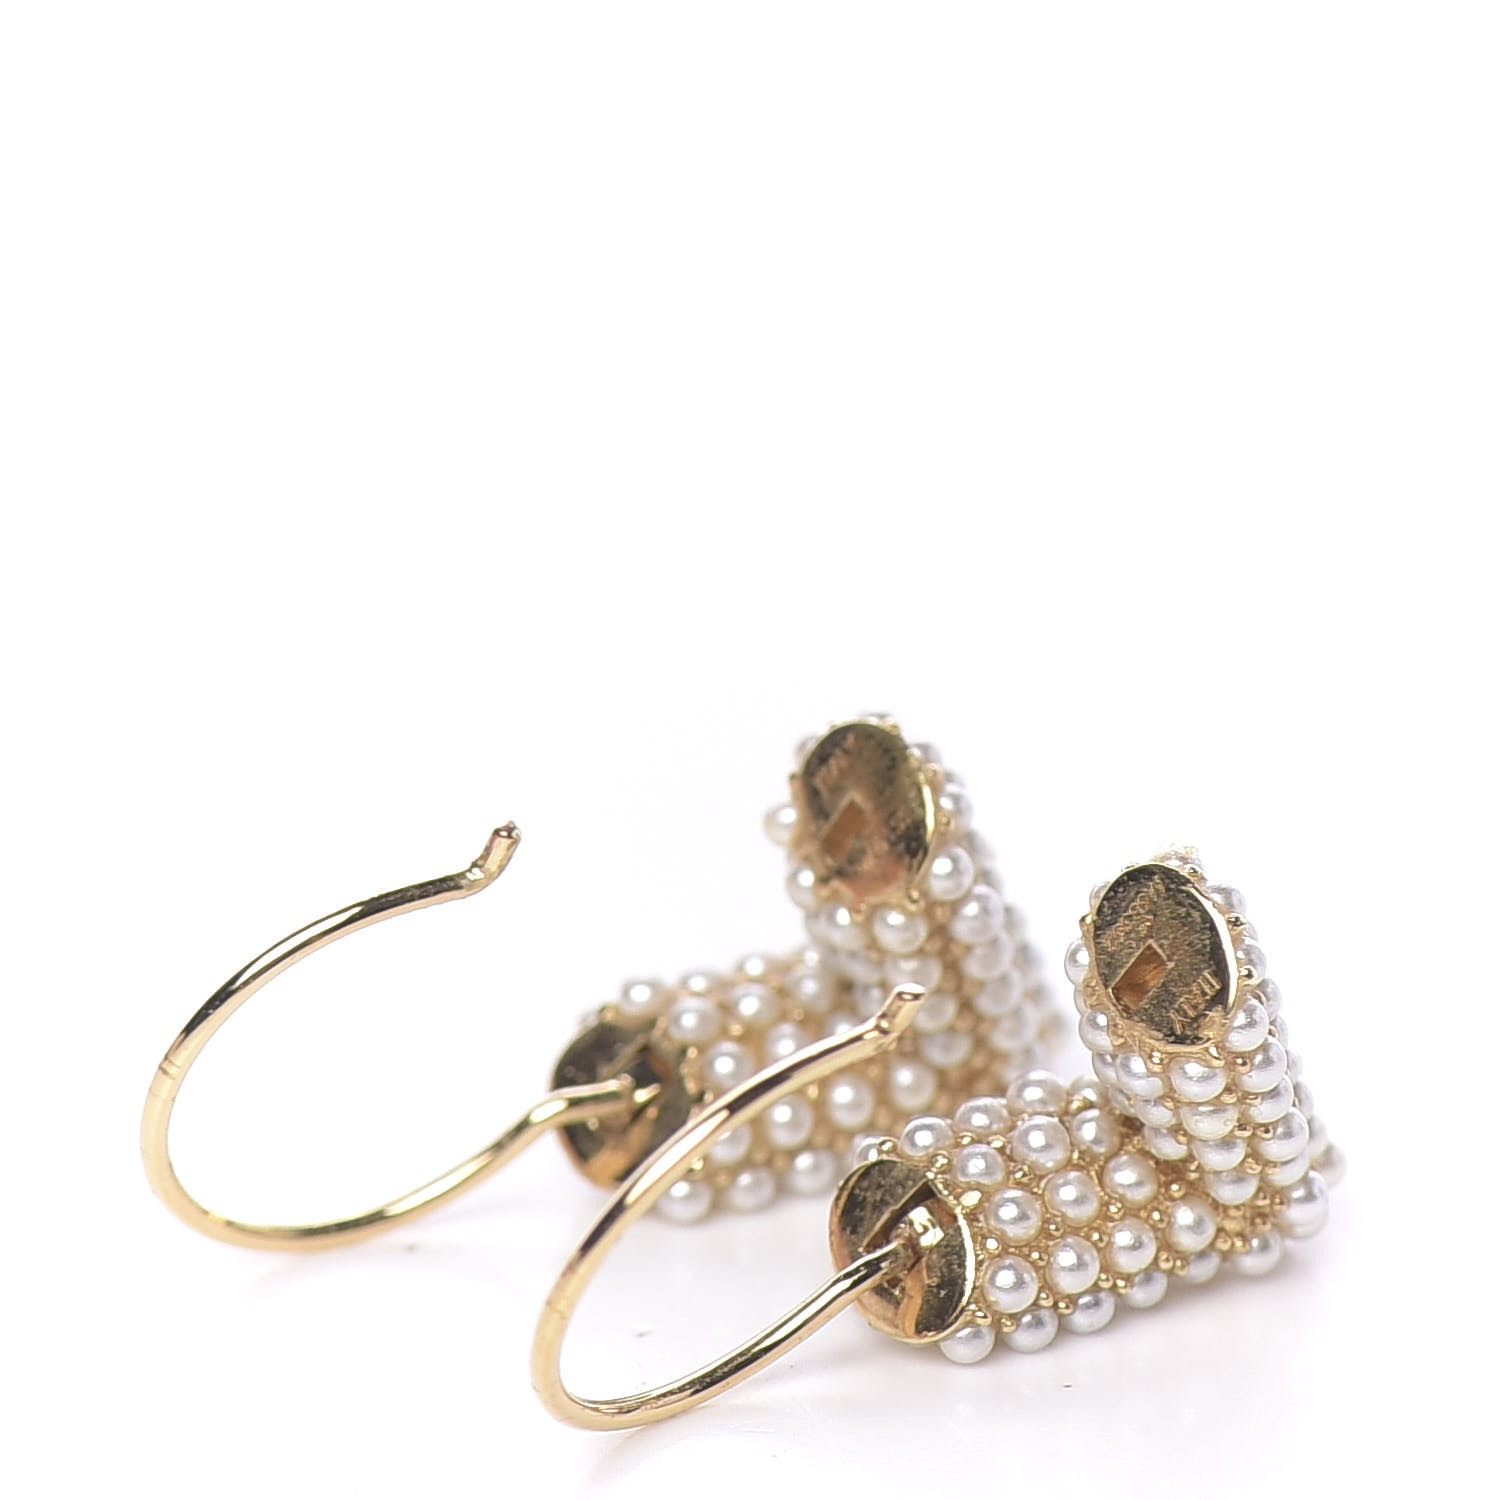 Louis Vuitton LV Eclipse Pearls Earrings, Gold, One Size